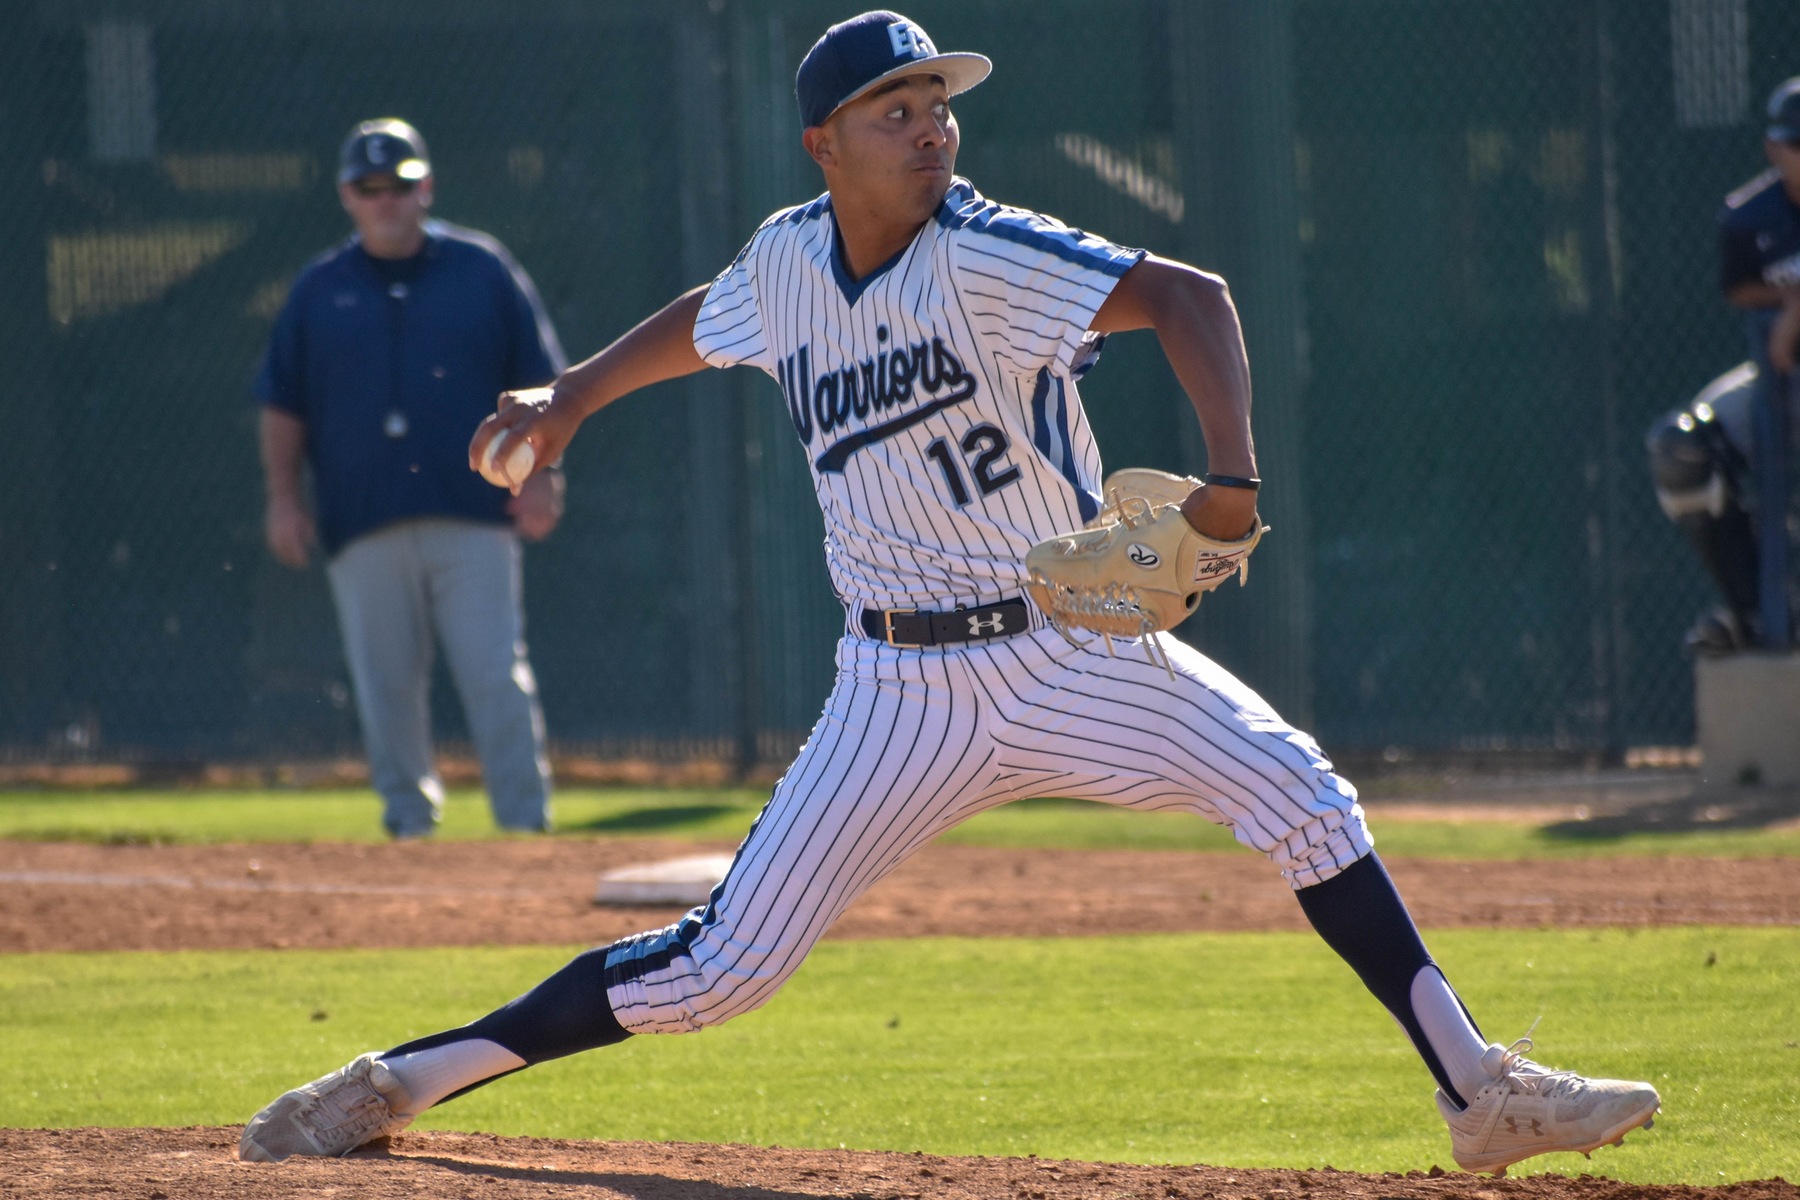 El Camino College, led by pitcher/hitter Jimmy Galicia, was leading the SCC baseball race at the time of the season stoppage.